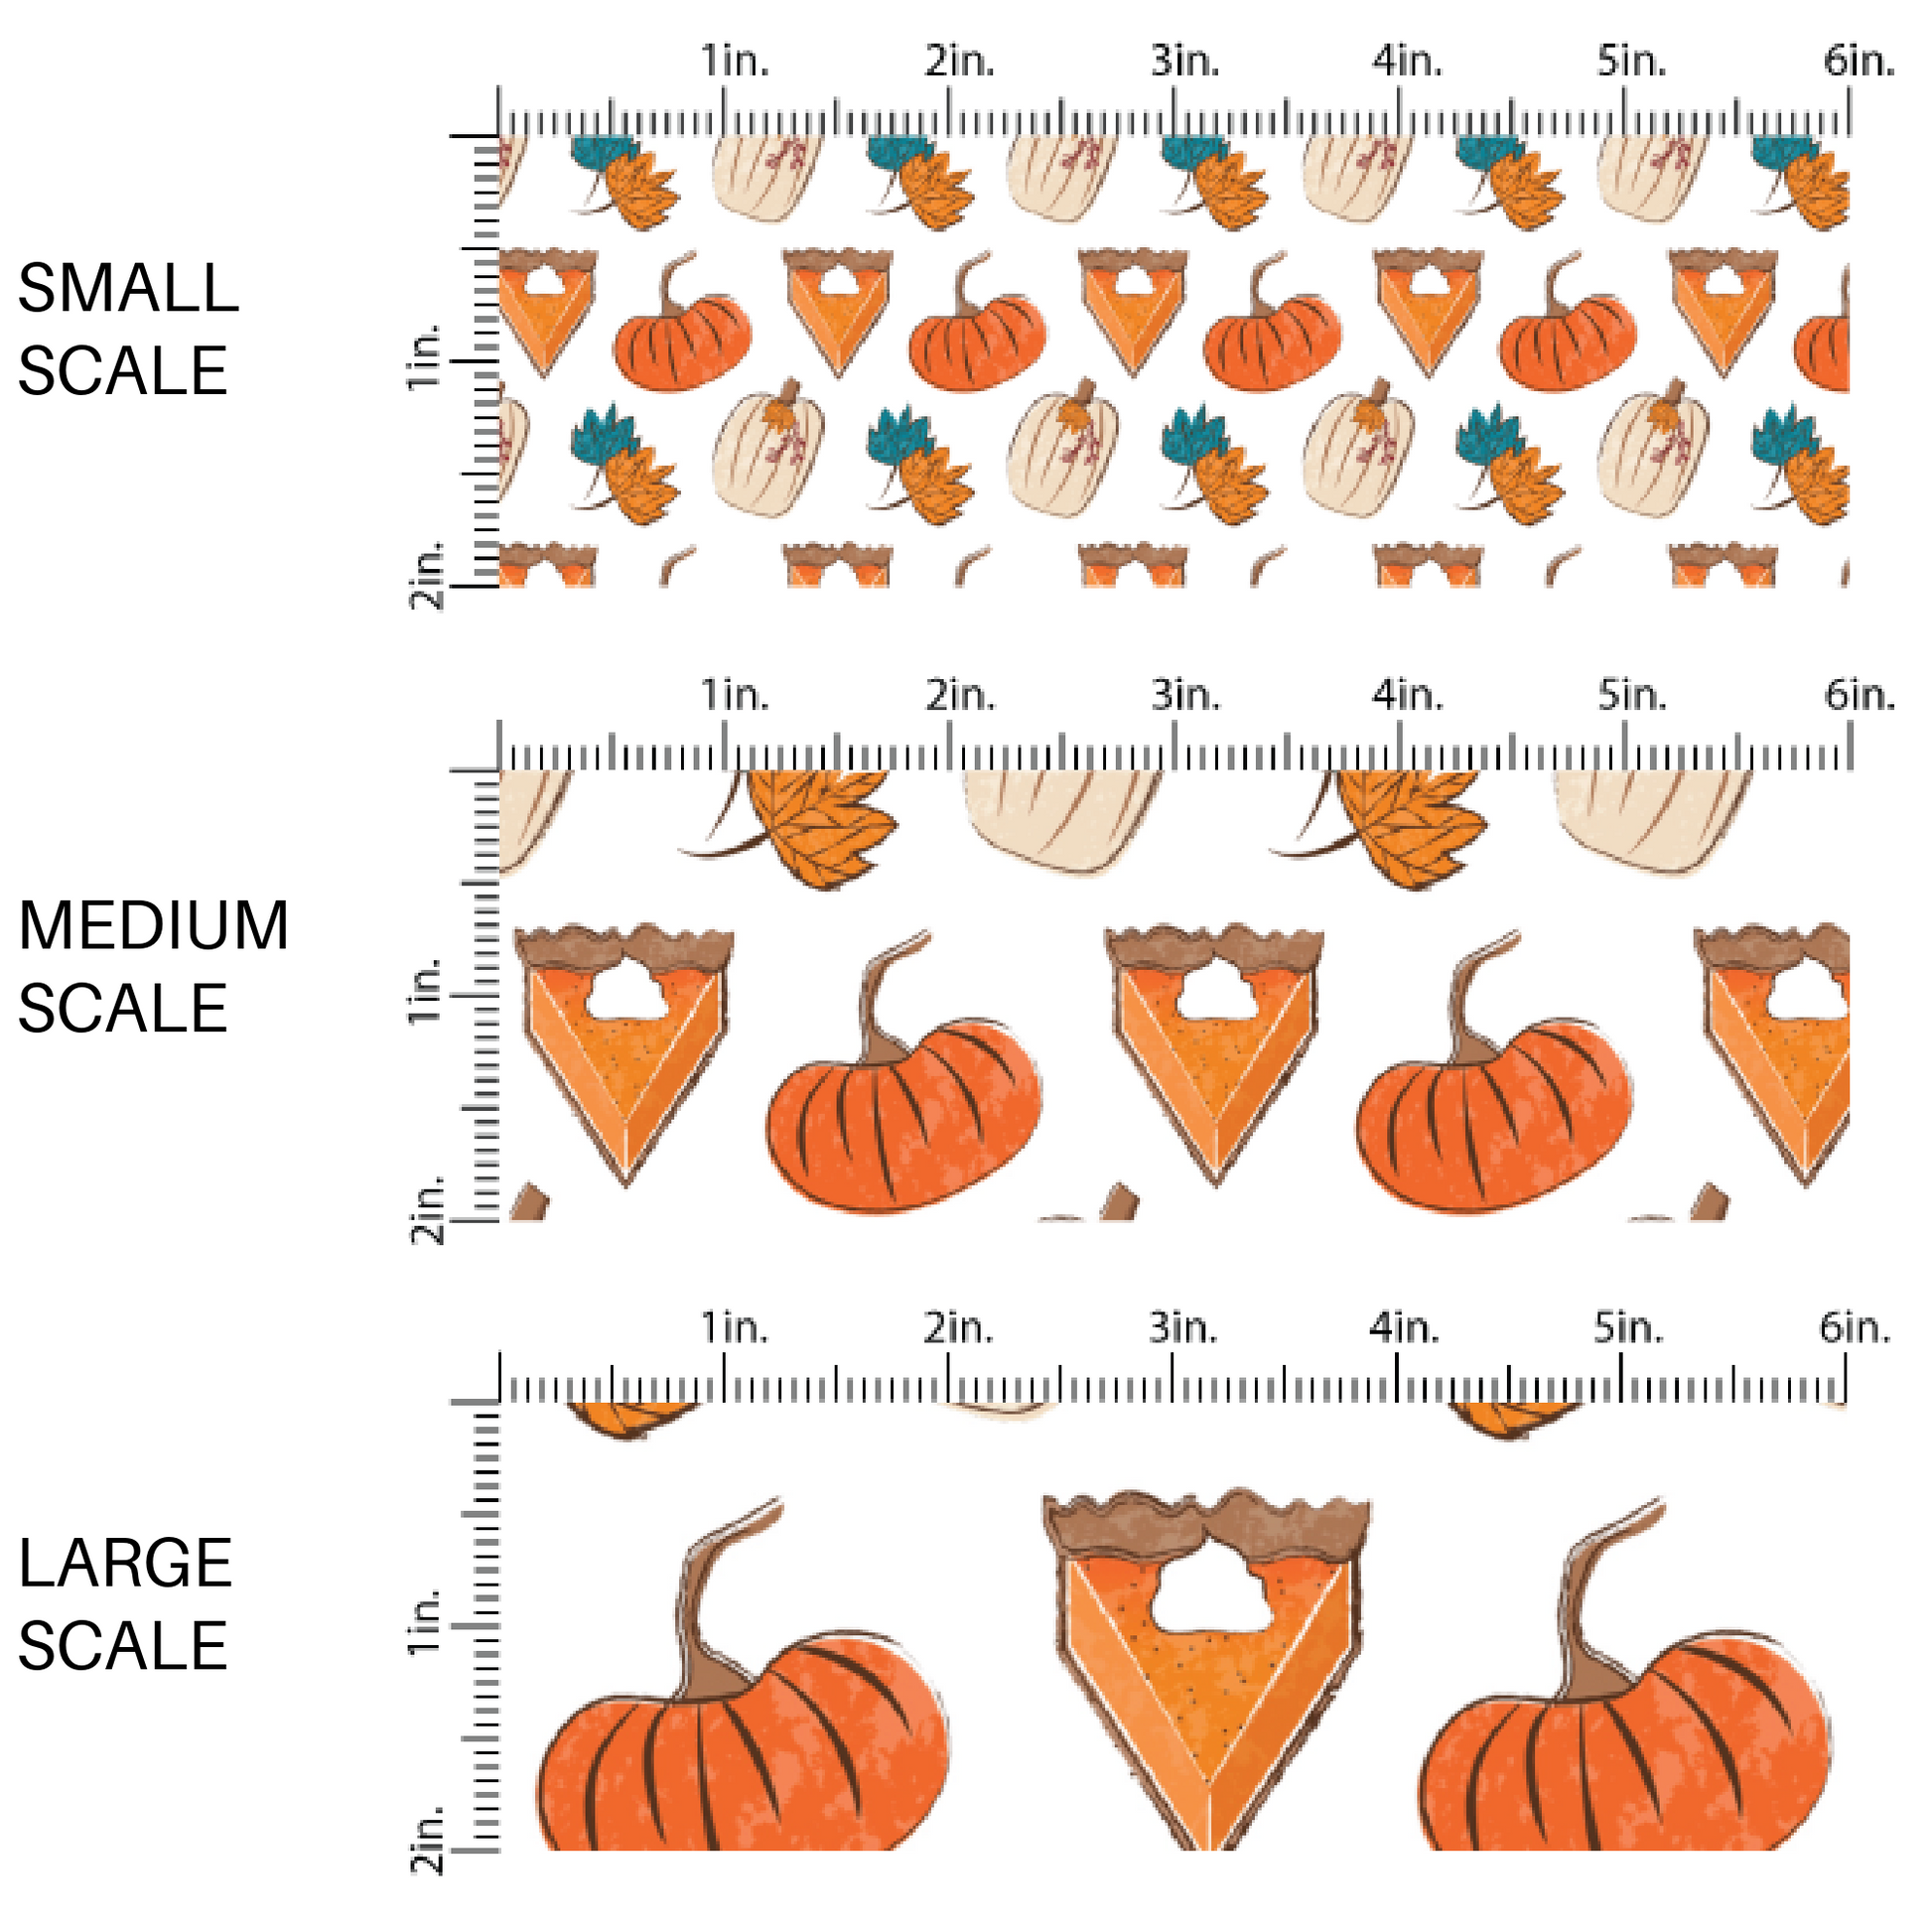 This scale chart of small scale, medium scale, large scale of these fall pumpkin themed cream fabric by the yard features pumpkin pie slices surrounded by leaves and pumpkins. This fun fall themed fabric can be used for all your sewing and crafting needs! 